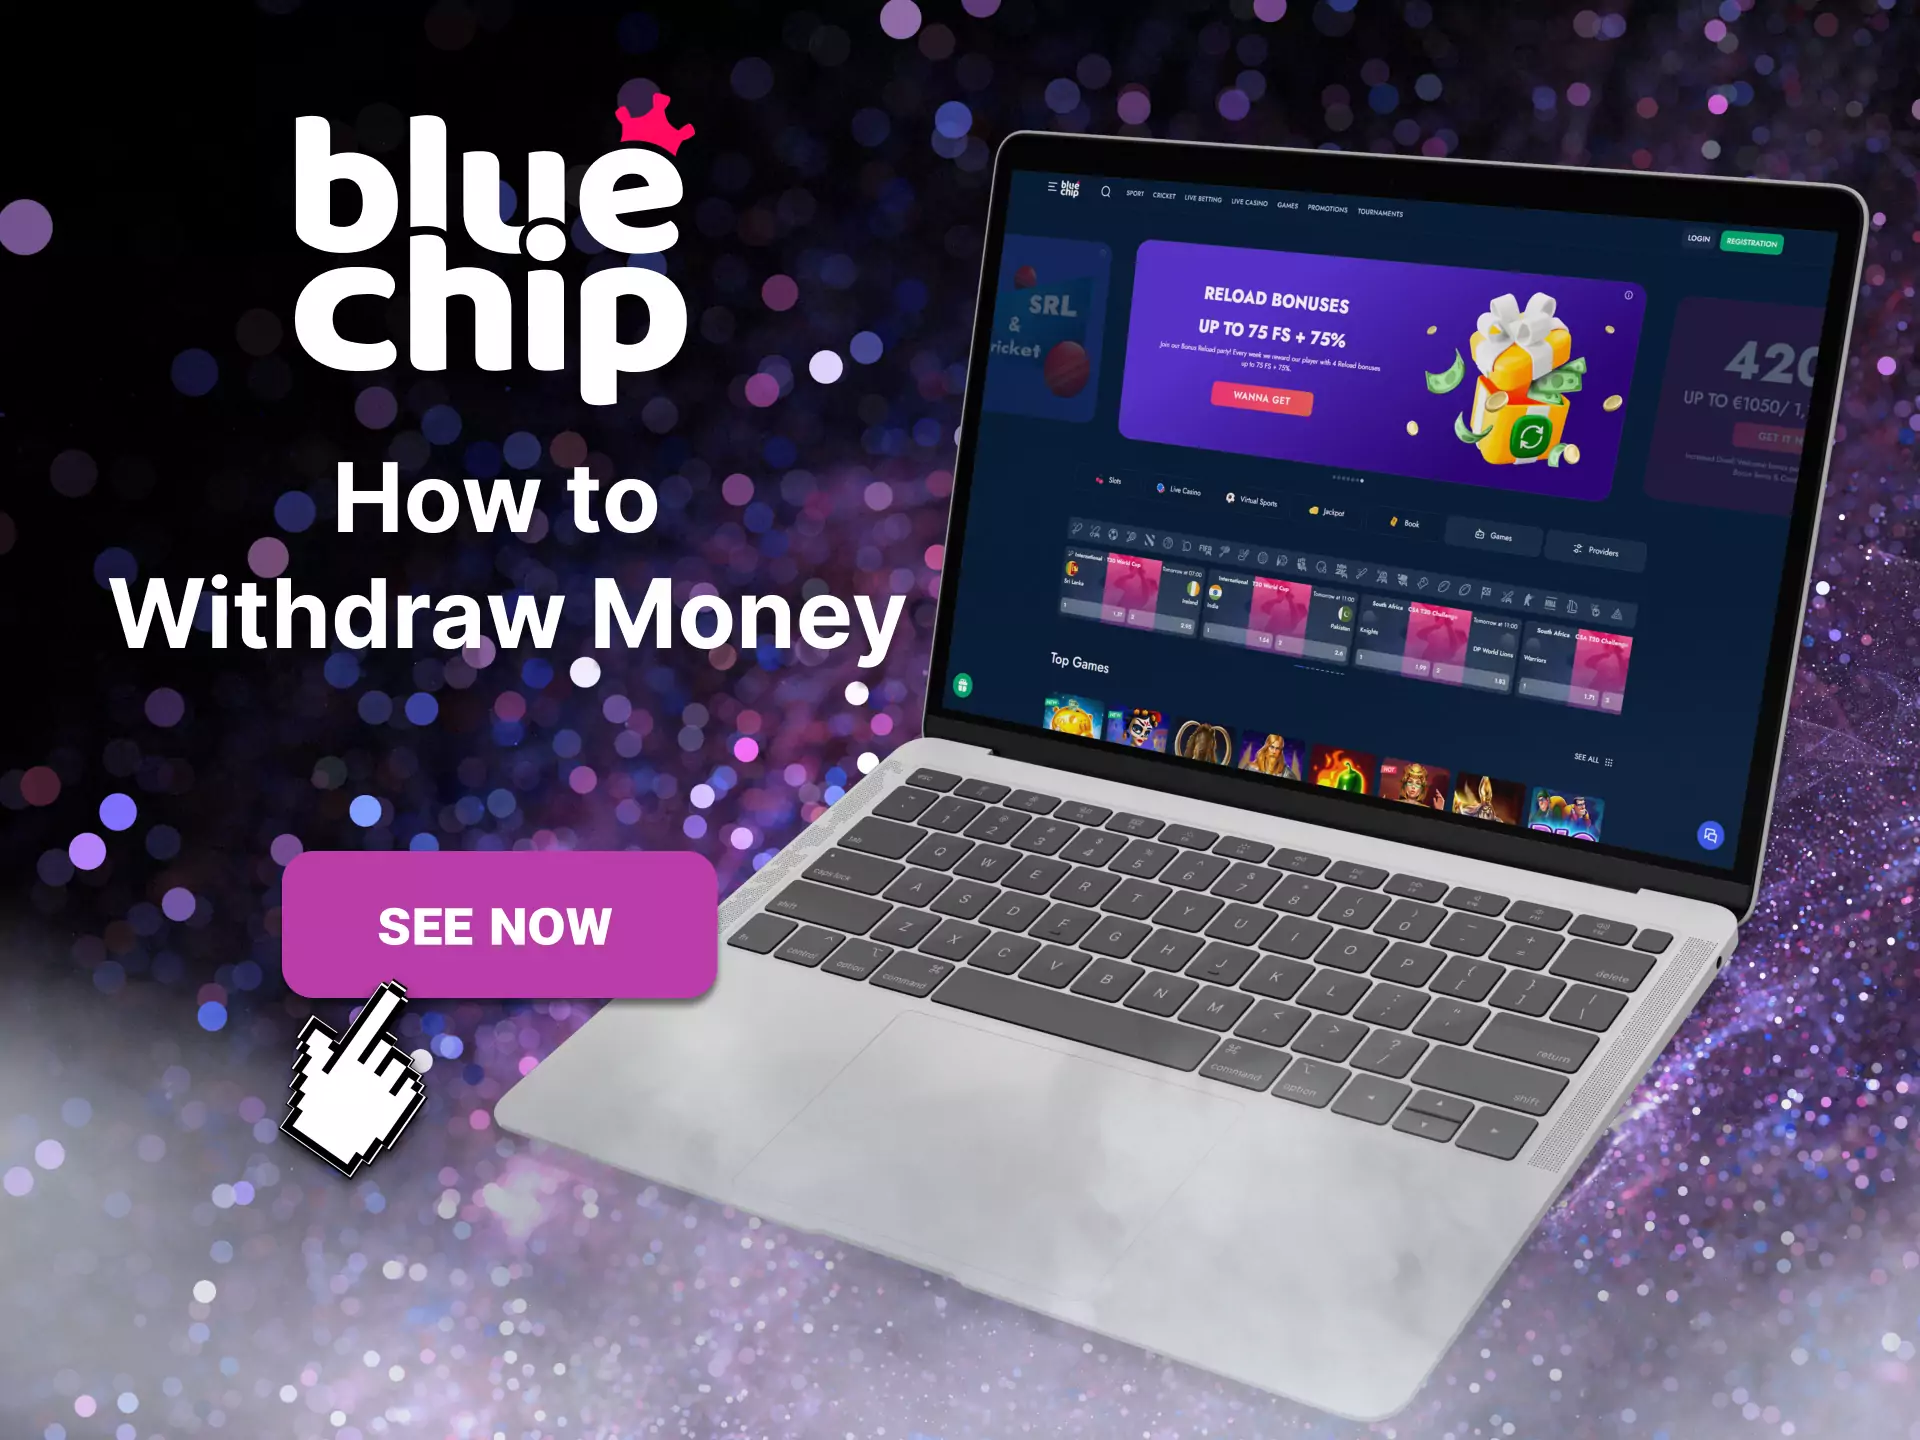 Use this instruction and withdraw money from the Bluechip without difficulty.